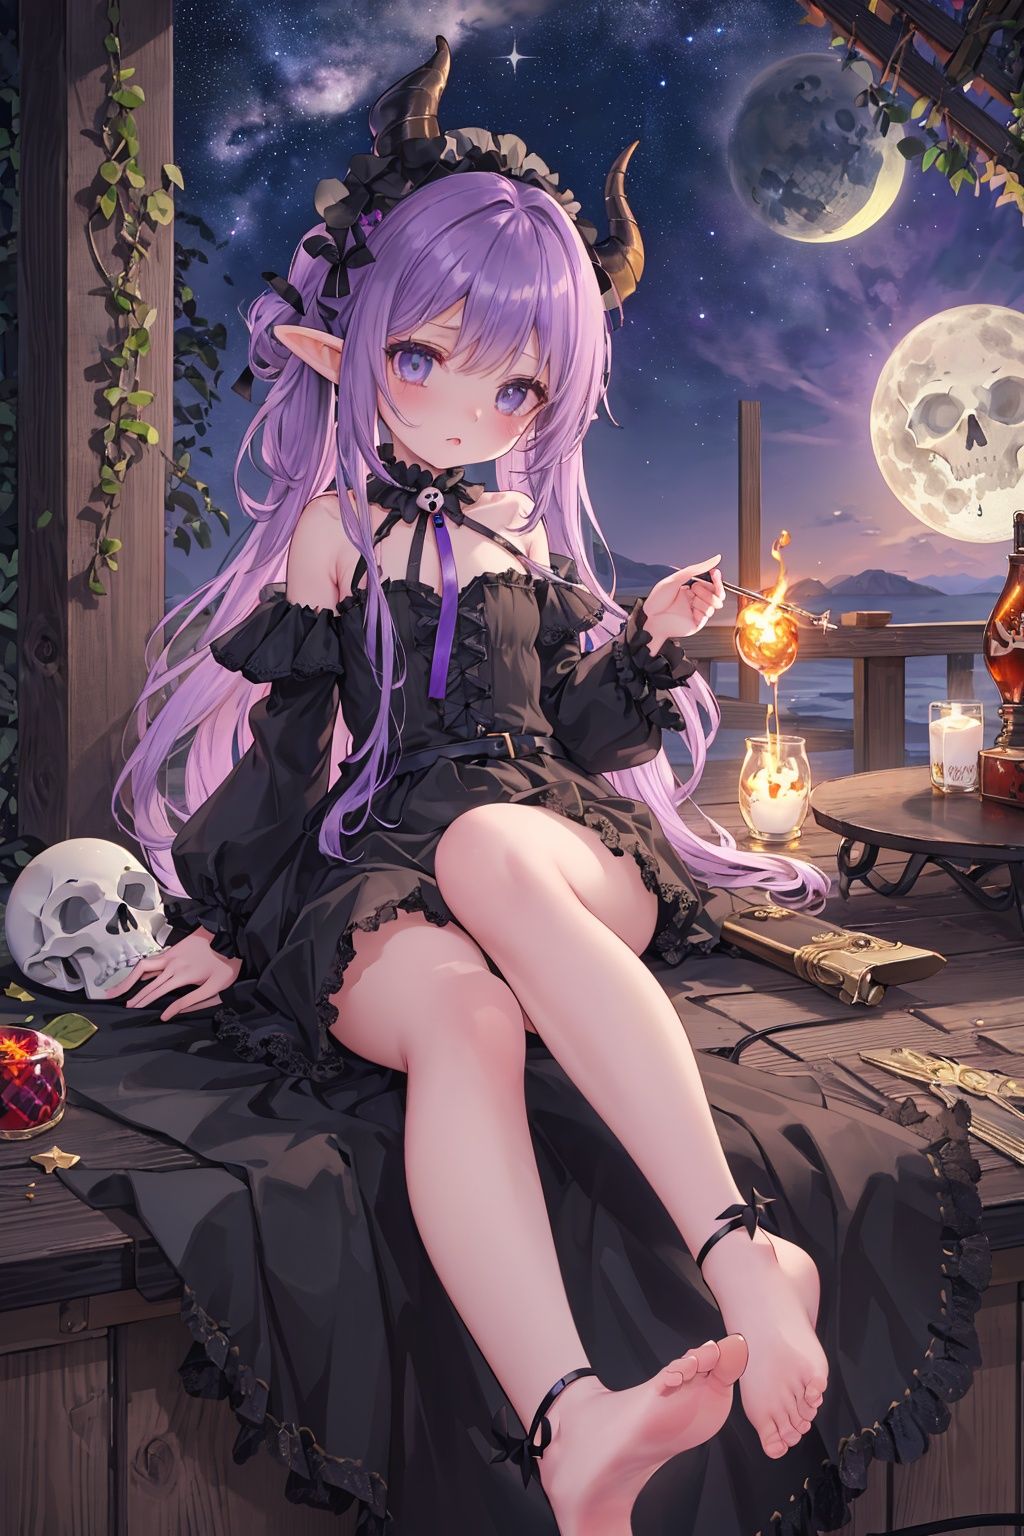 //,masterpiece, ((best quality)), (ultra-detailed), (illustration), an extremely delicate and beautiful, dynamic angle, chromatic aberration,((Medium shot)), ((colorful)),//,little girl,1girl,loli,petite,black dress,lolita,Bare foot,blue eyes,dark purple hair,long hair,Dead skin,Shiny skin,small breast,ringlet twin tail,(Skull headwear,Demon tail,Demon horn,elf,hair ribbon),despair,The crows were feeding on the rotting carcass,table,hell,Beelzebub,dark,night,(moon:1.02),star,meteor,milky way,